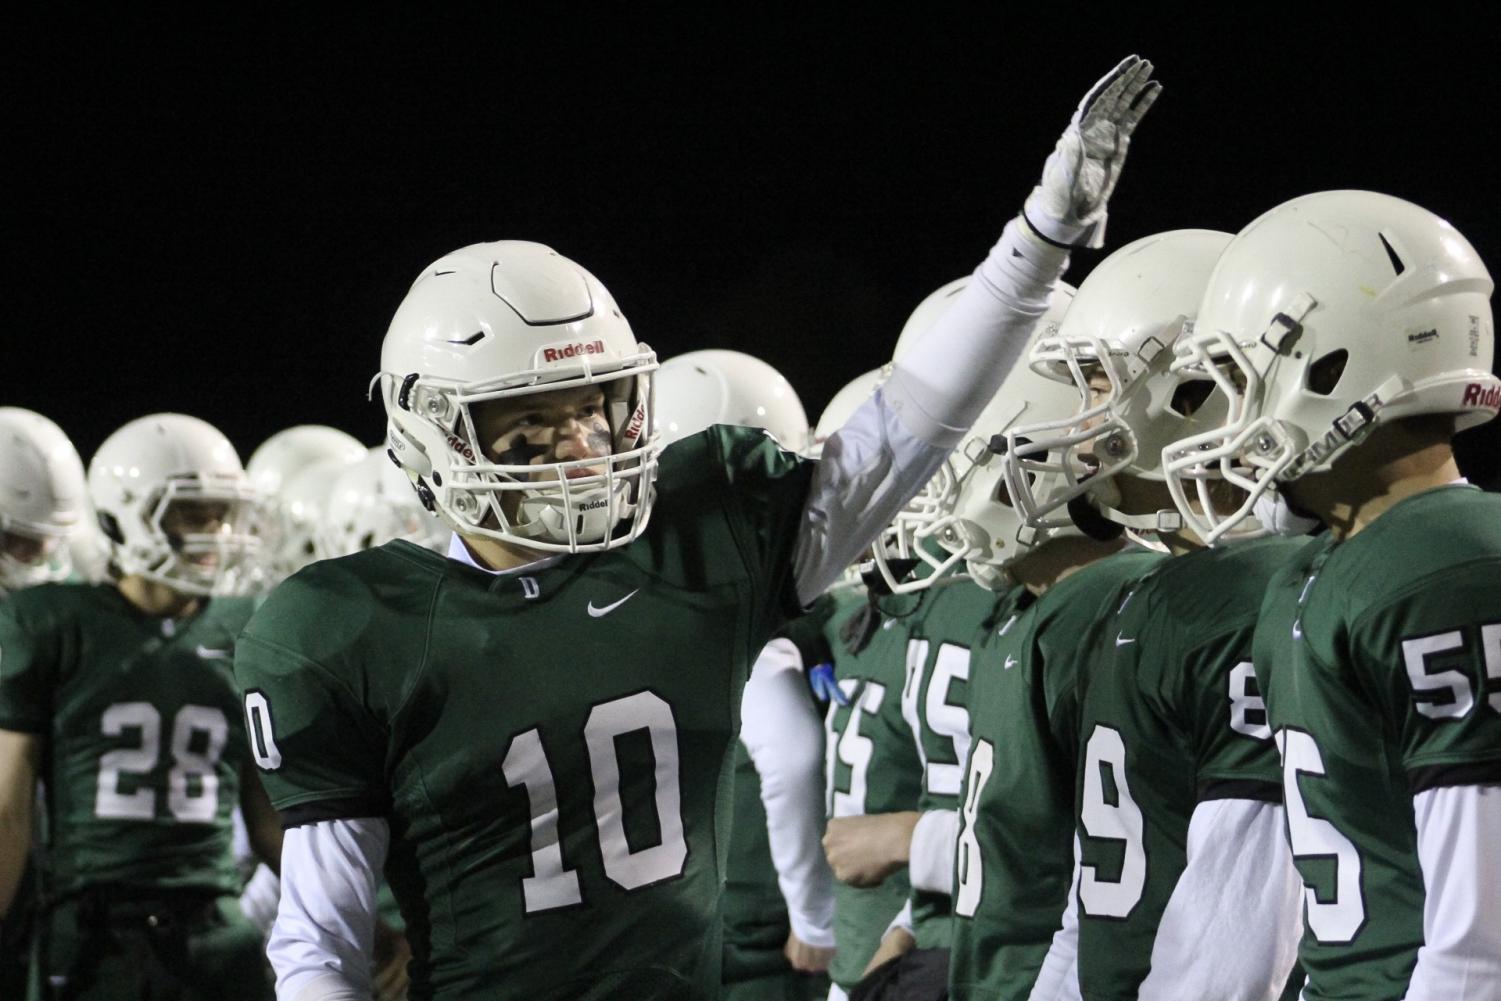 Derby+vs.+Topeka+Football+photo+gallery+%28Photos+by+Grace+Reich%29